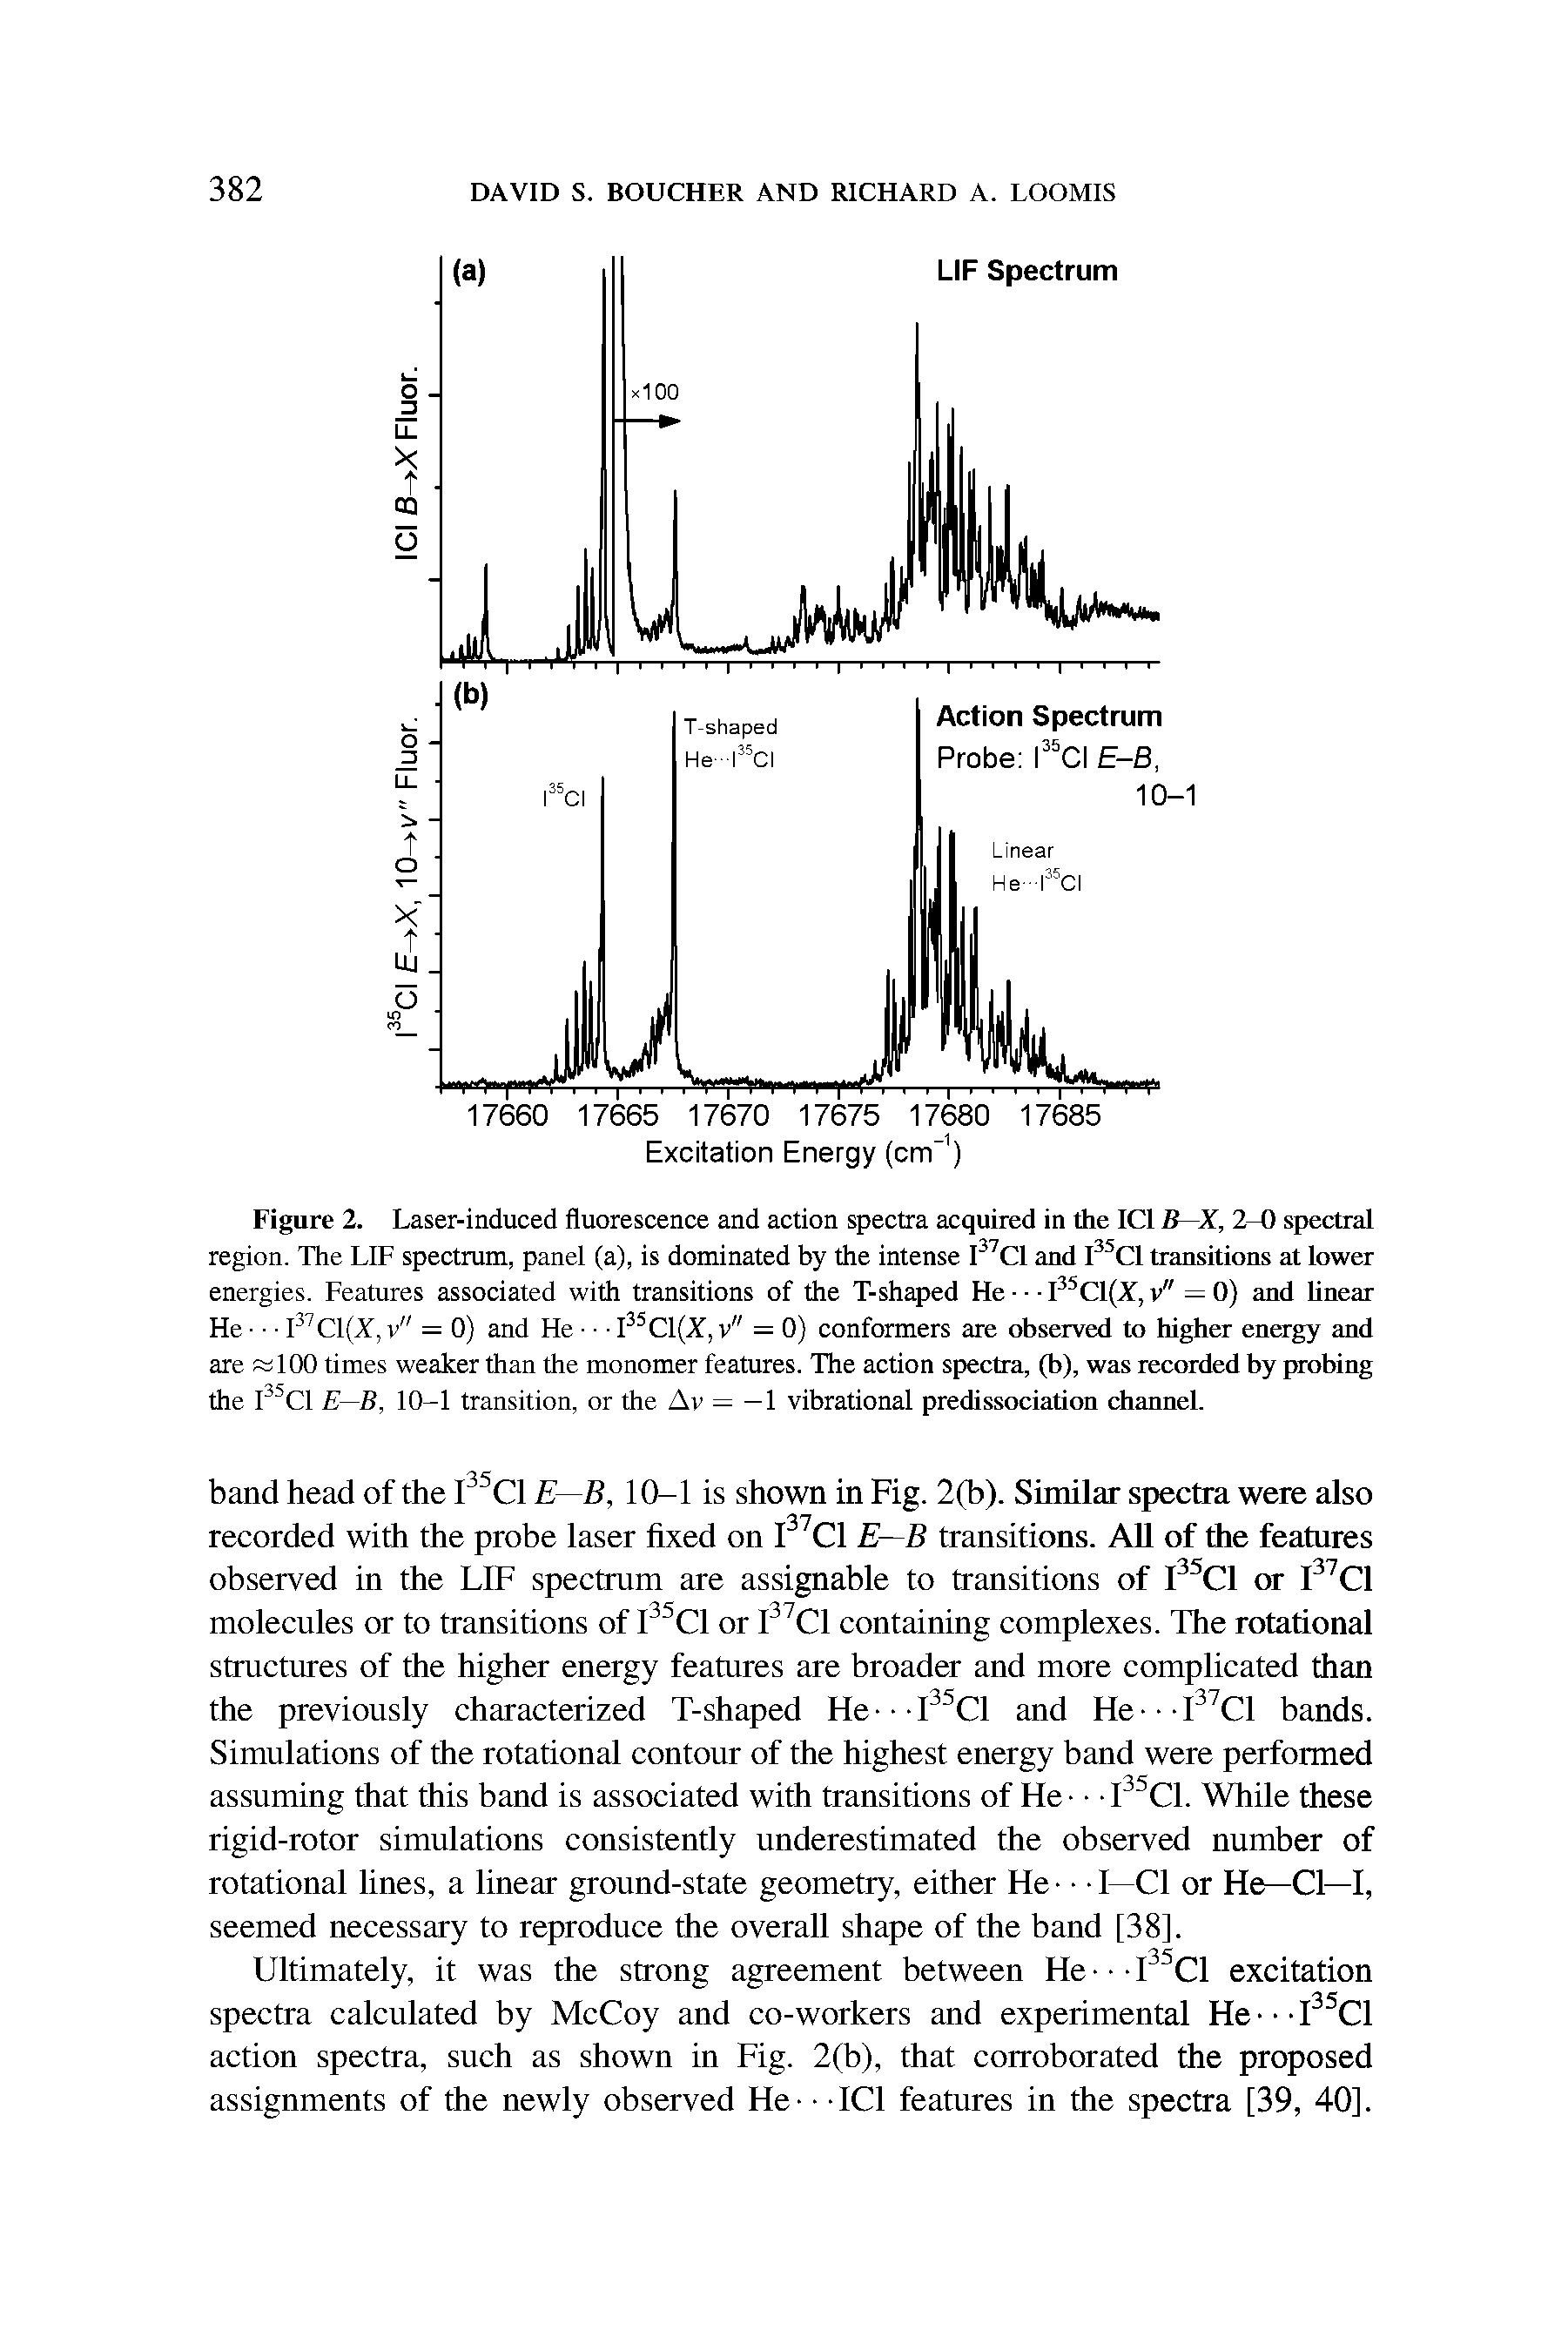 Figure 2. Laser-induced fluorescence and action spectra acquired in the ICl B—X, 2-0 spectral region. The LIF spectrum, panel (a), is dominated by the intense I Cl and I Cl transitions at lower energies. Features associated with transitions of the T-shaped He I C1(X, v" = 0) and hnear He I C1(A, v" = 0) and He I C1(X, v" = 0) conformers are observed to higher energy and are rs 100 times weaker than the monomer features. The action spectra, (b), was recorded by probing the I Cl E—B, 10-1 transition, or the Av = — 1 vibrational predissociation channel.